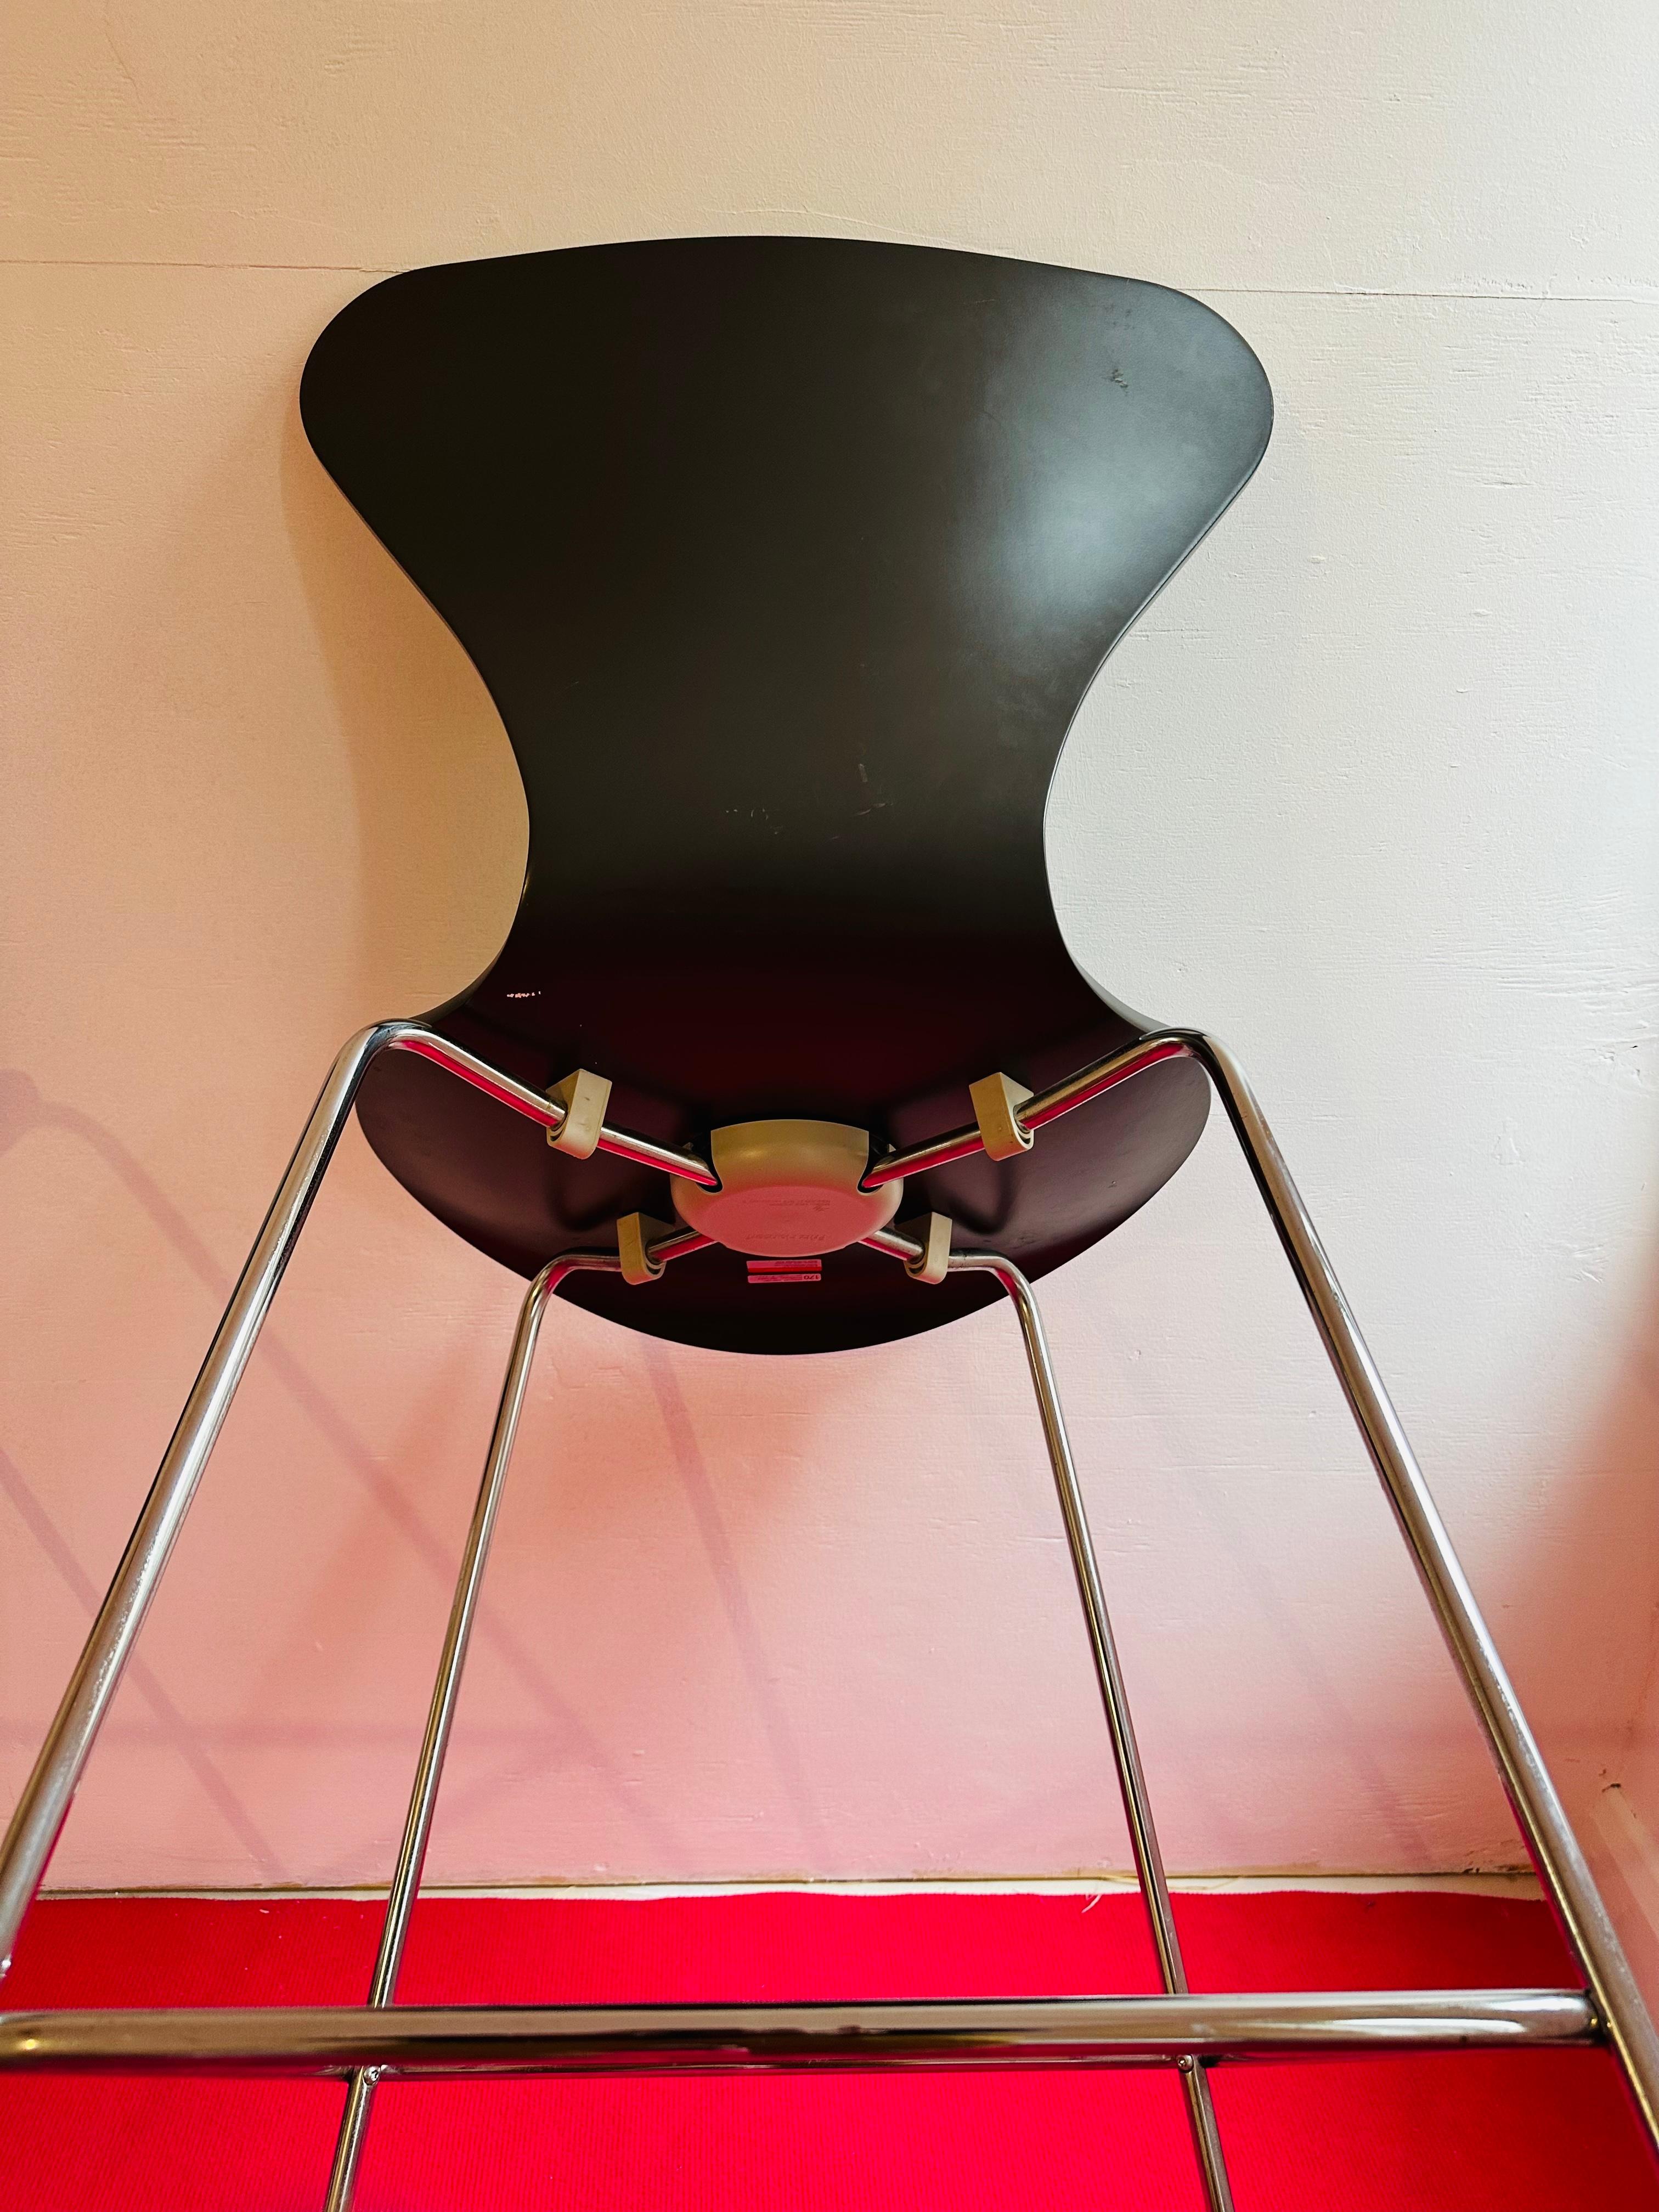 Pair of Fritz Hansen Series 7 Bar Stools designed by Arne Jacobsen in 1955.  Year of manufacture 2005.

The seat is made from curved ash with a dark grey lacquered finish with chromed steel legs.  

In good vintage condition with some chips and